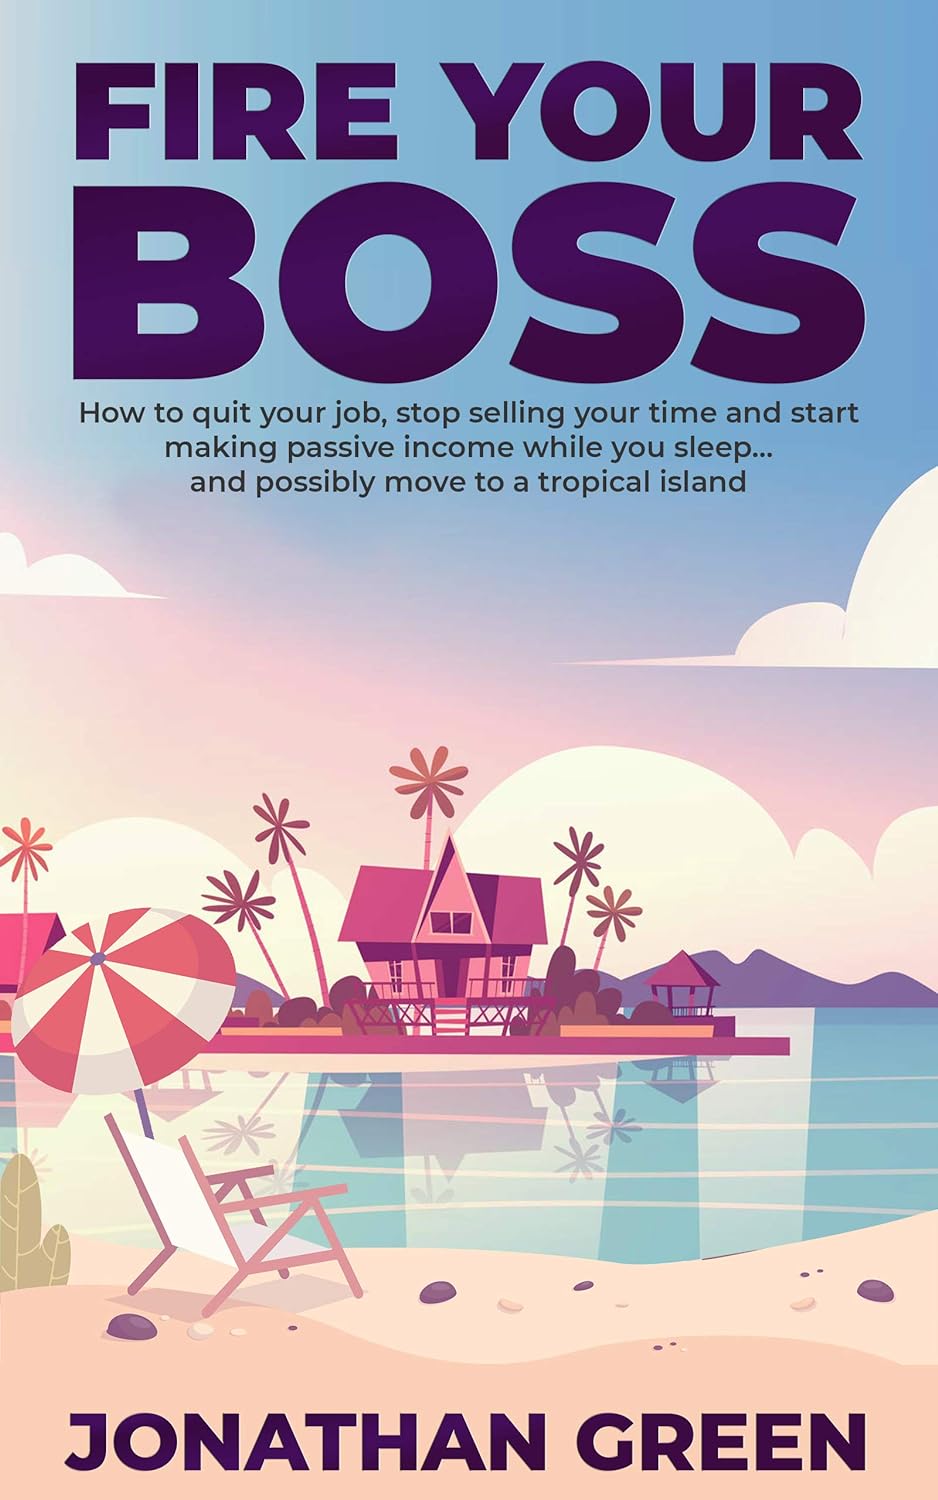 Fire Your Boss How to quit your job and start making passive income by Bestselling Author Jonathan Green